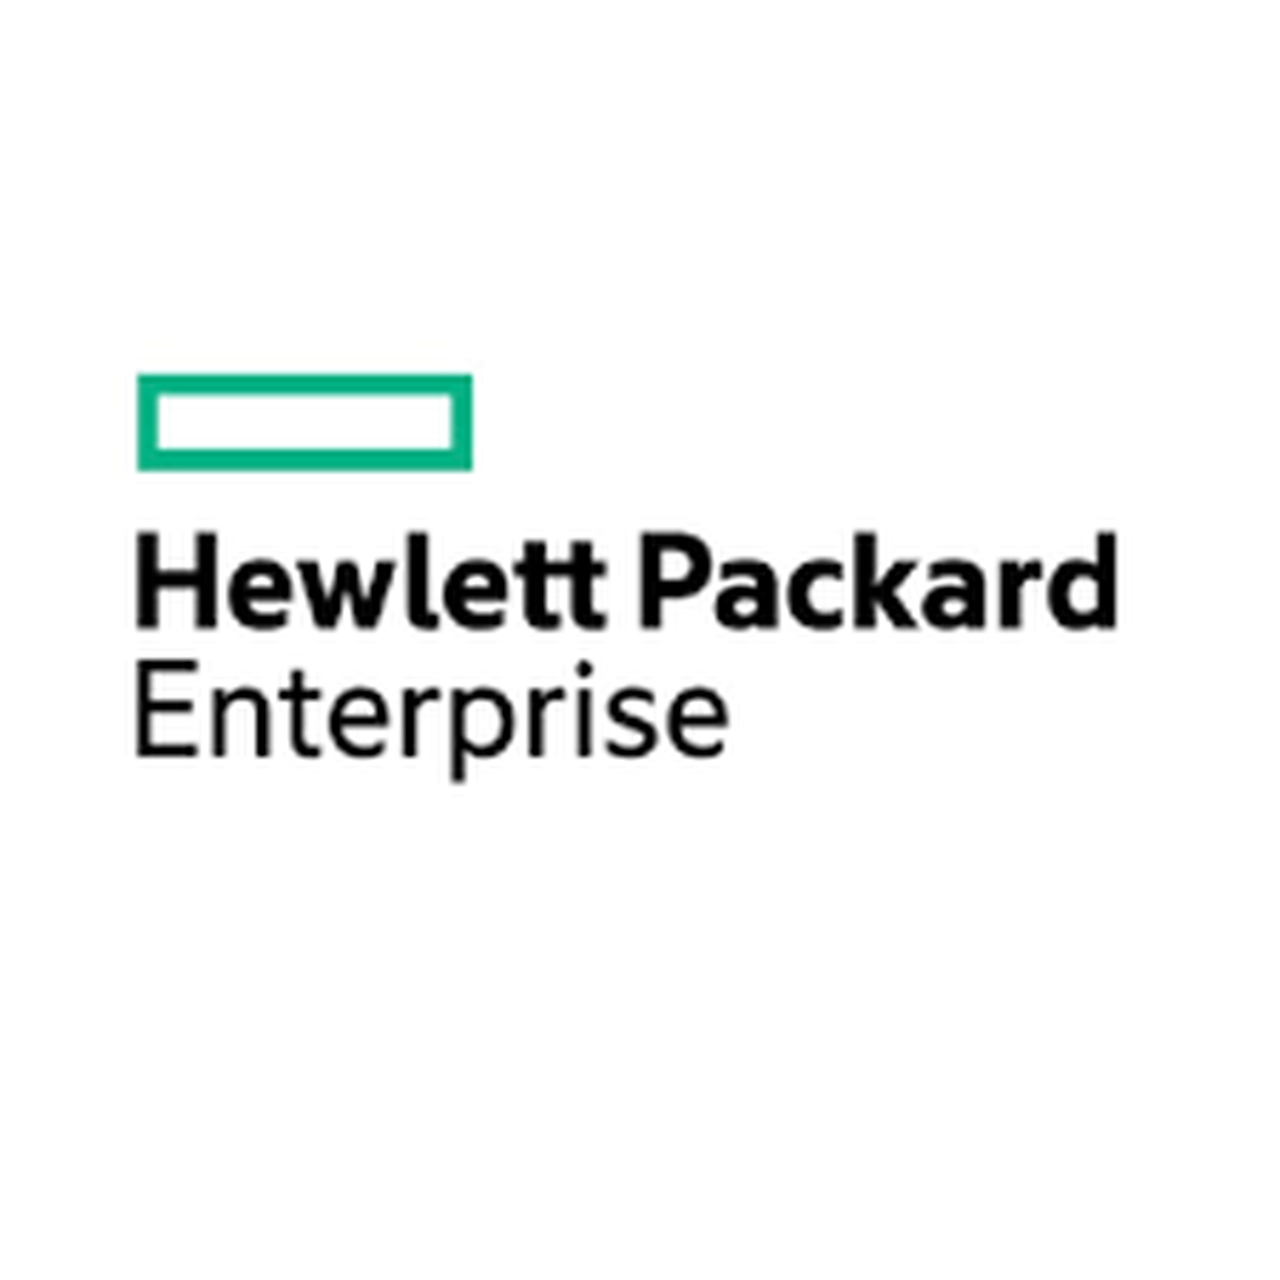 HPE CL BCM 9460-8i CVPM05 RAID Cntlr Factory integrated